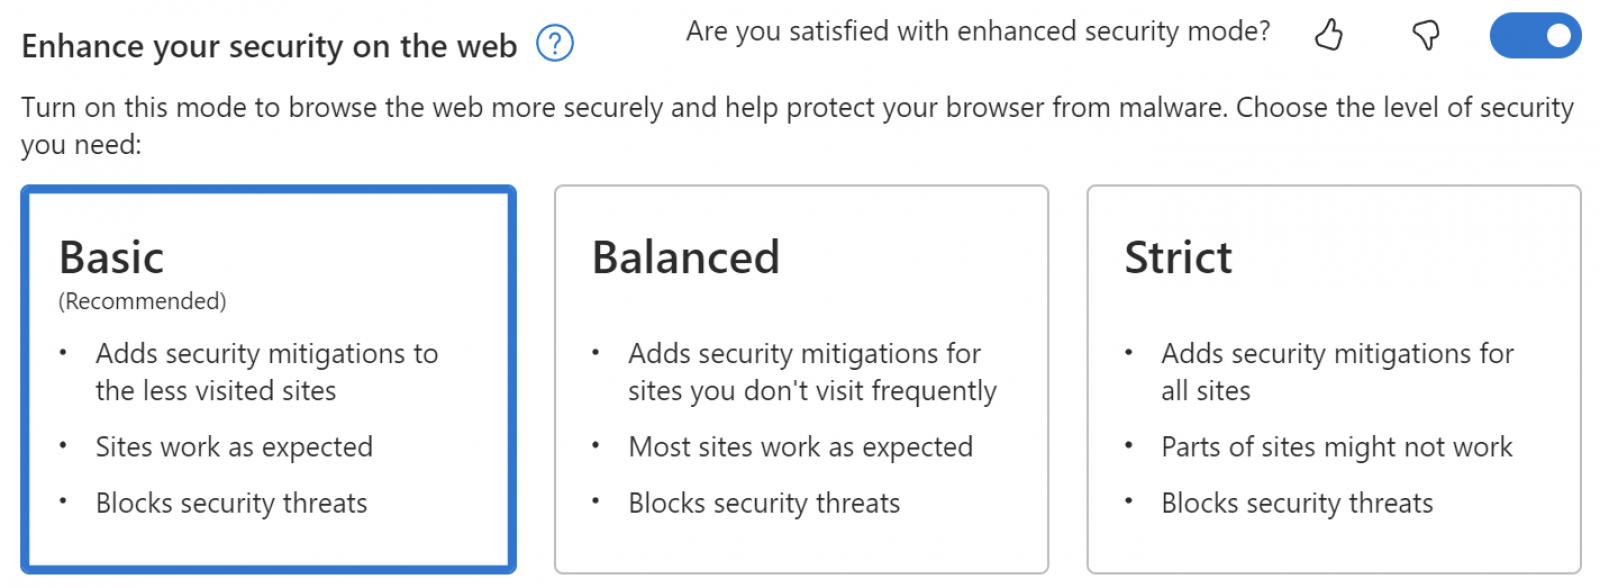 Edge - Enhance your security on the web